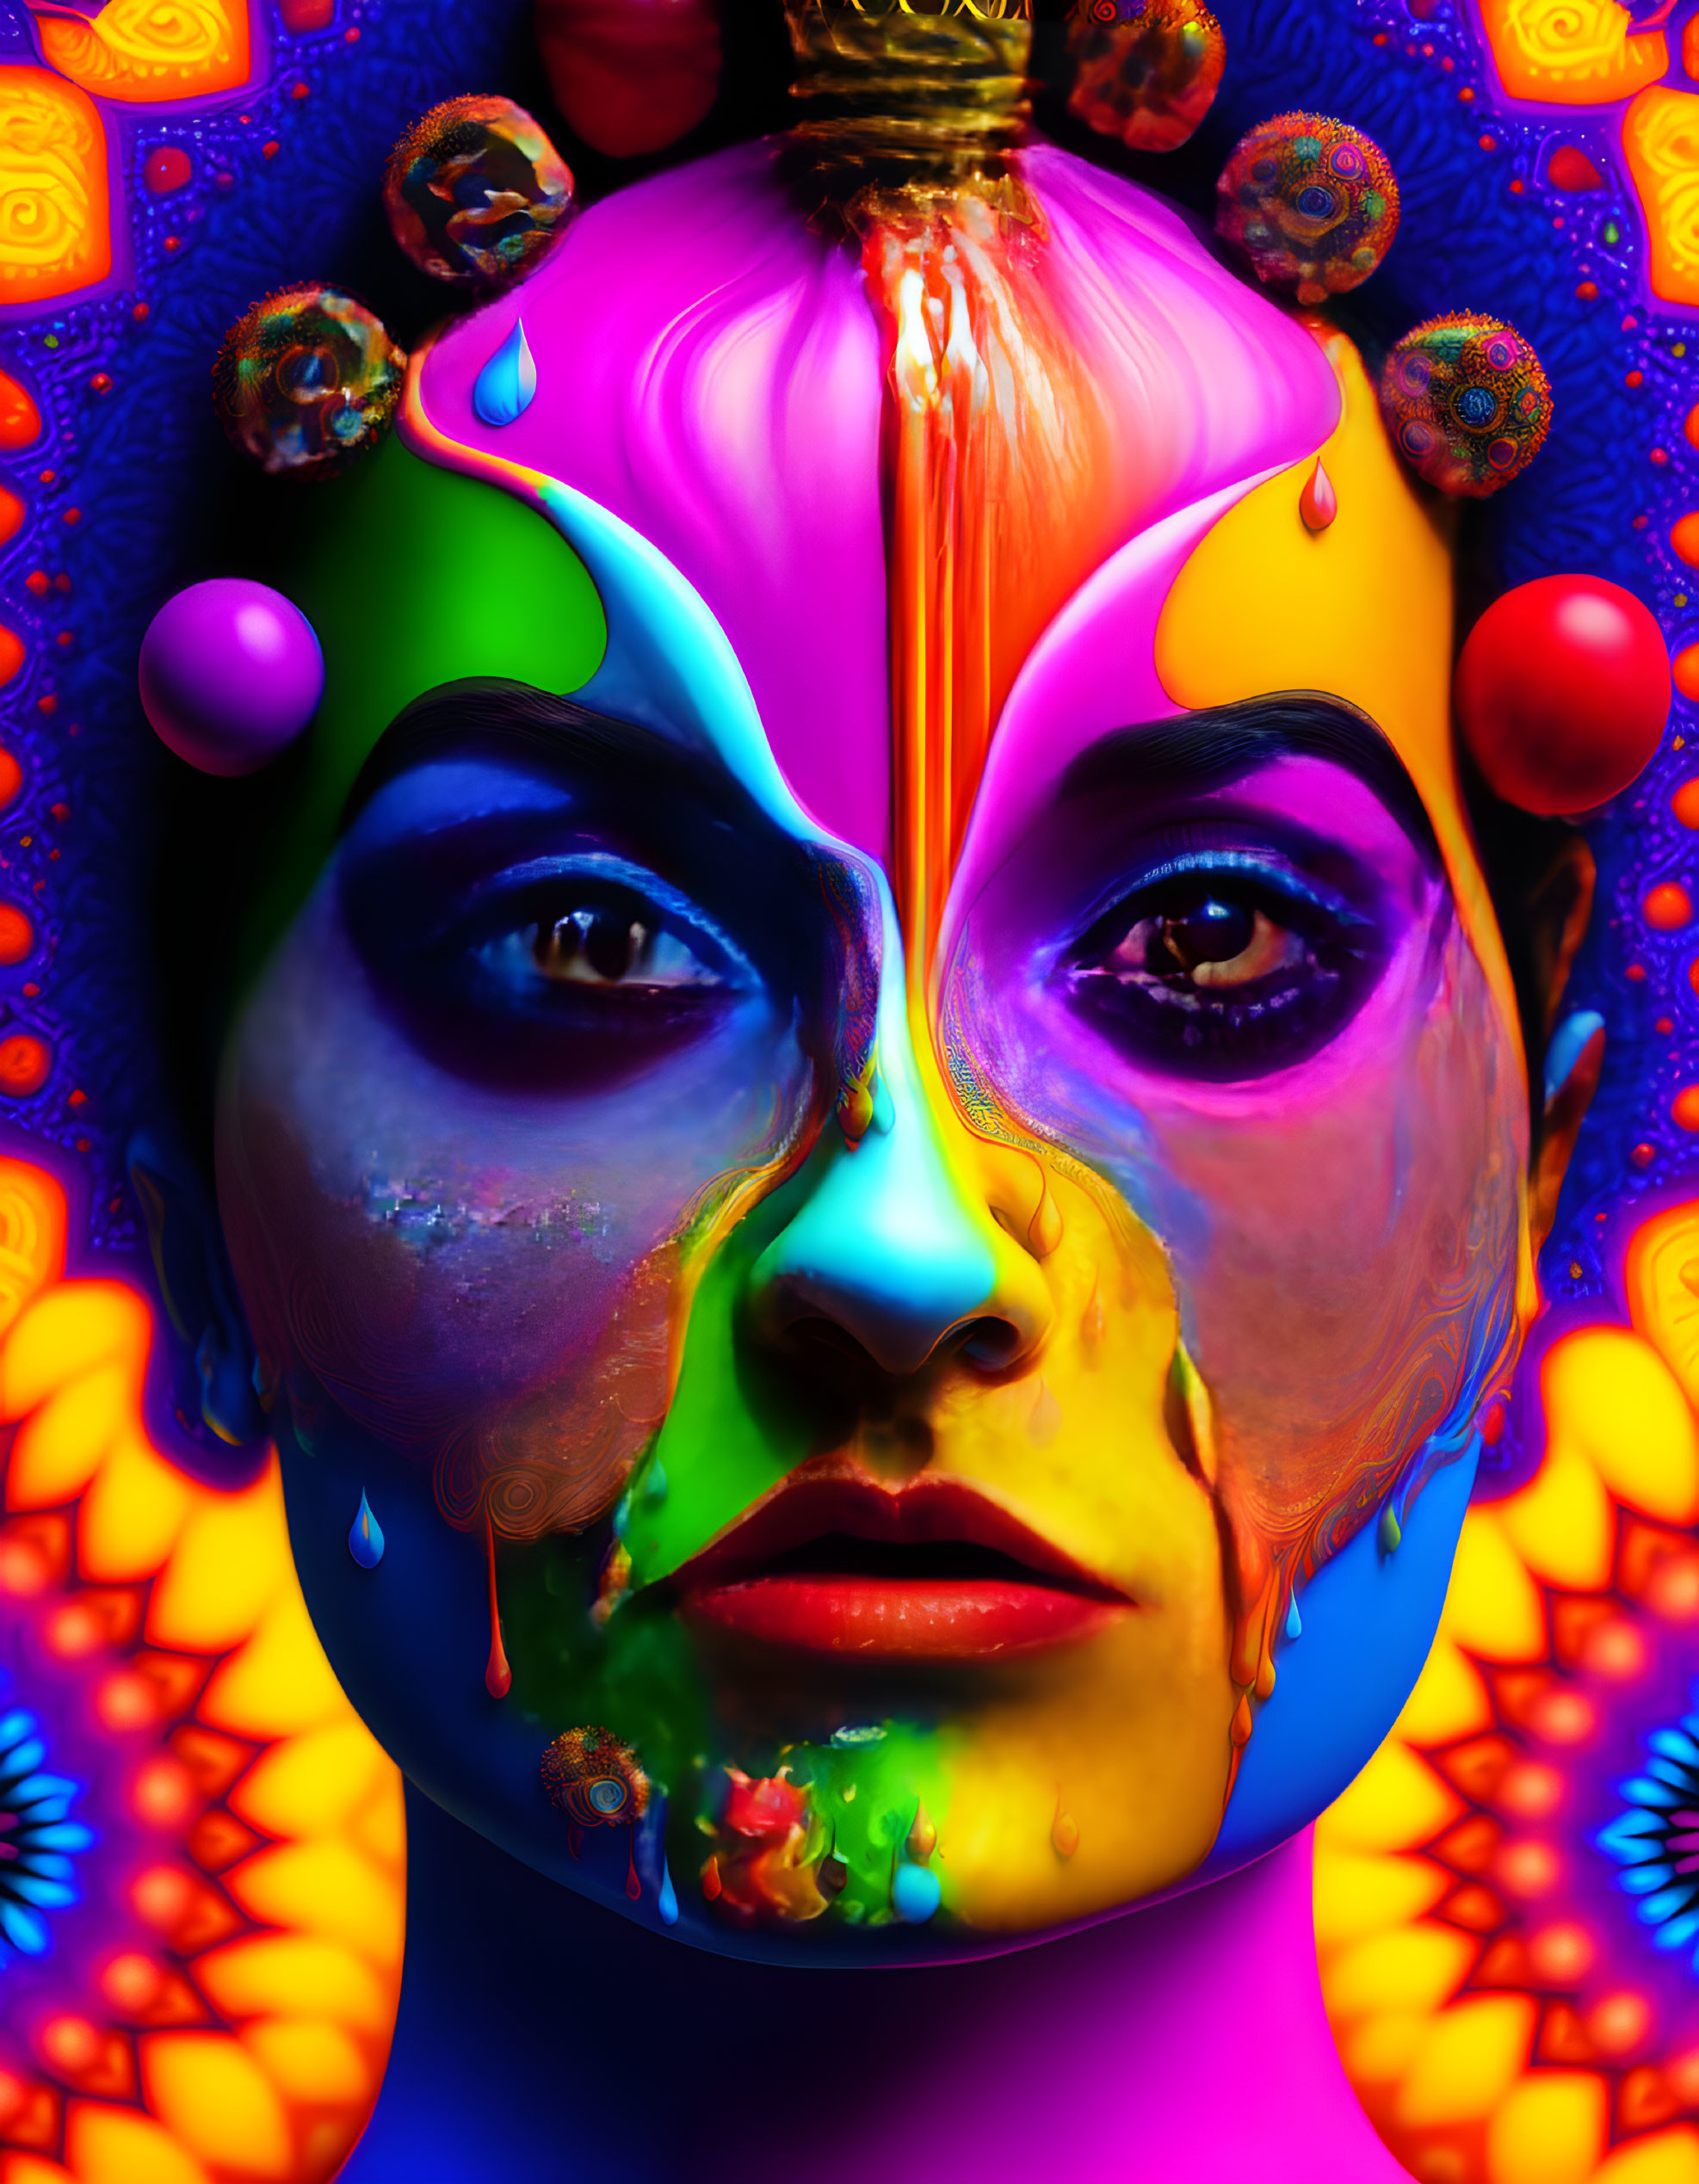 Colorful Female Face Portrait with Dripping Paint on Psychedelic Background